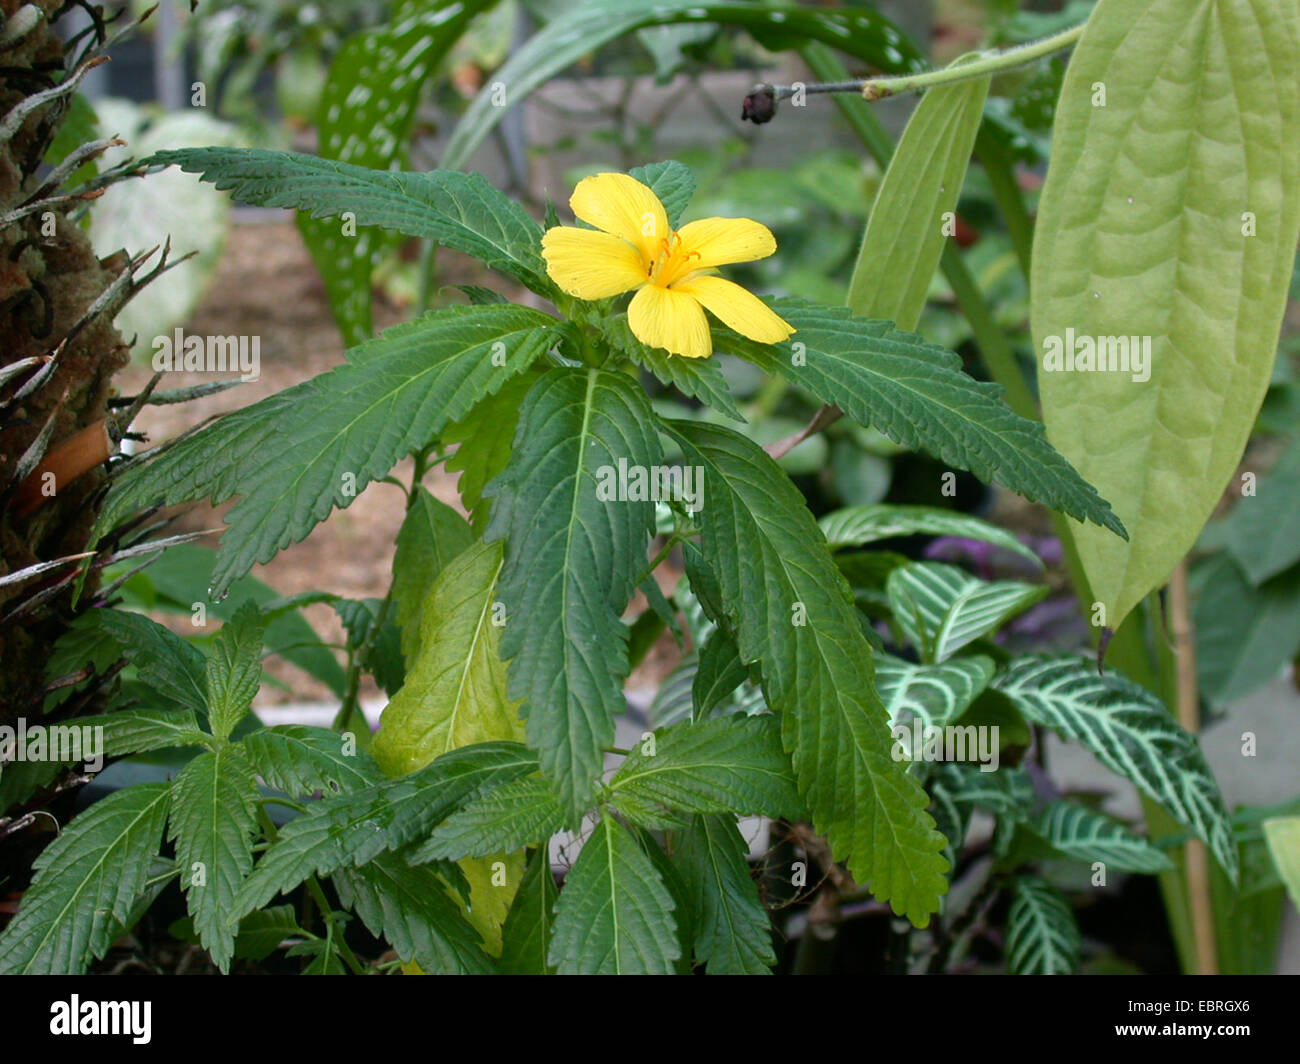 Sage Rose, West Indian Holly, Yellow Alder, Buttercup Flower, Damiana (Turnera ulmifolia), blooming Stock Photo